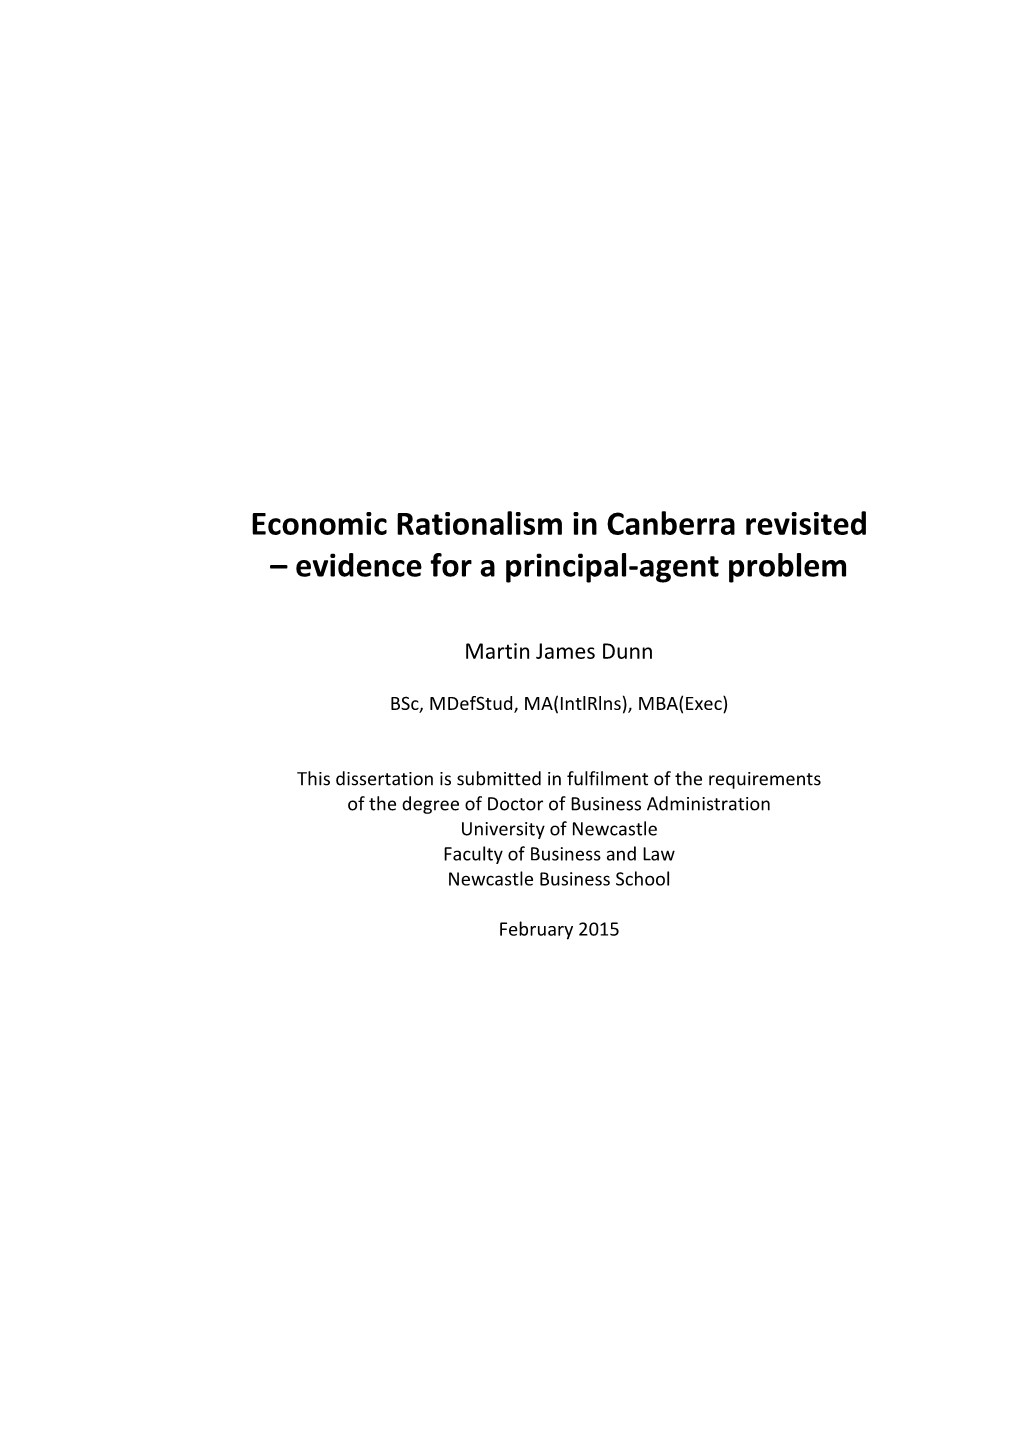 Economic Rationalism in Canberra Revisited – Evidence for a Principal-Agent Problem